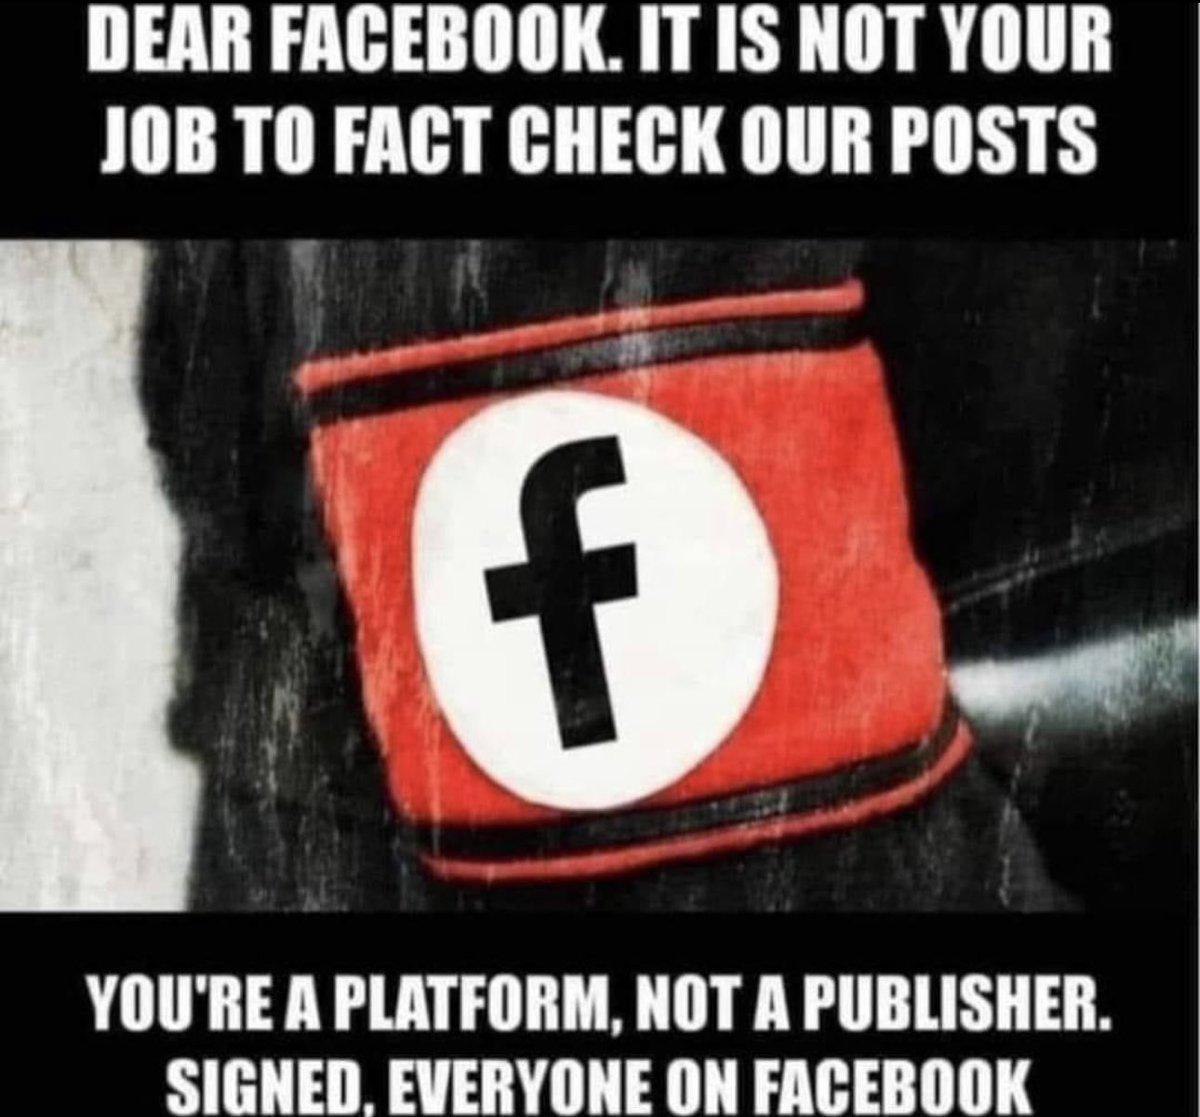 FAKEBOOK AT IT AGAIN!😡😡👿👿Guess Dems, fake news & Big Tech have now decided to shadow ban @OANN on Facebook for exposing that which the Swamp would rather keep from the public. Luckily, TruthSocial.com & Gab.com have no such restrictions. Today on…